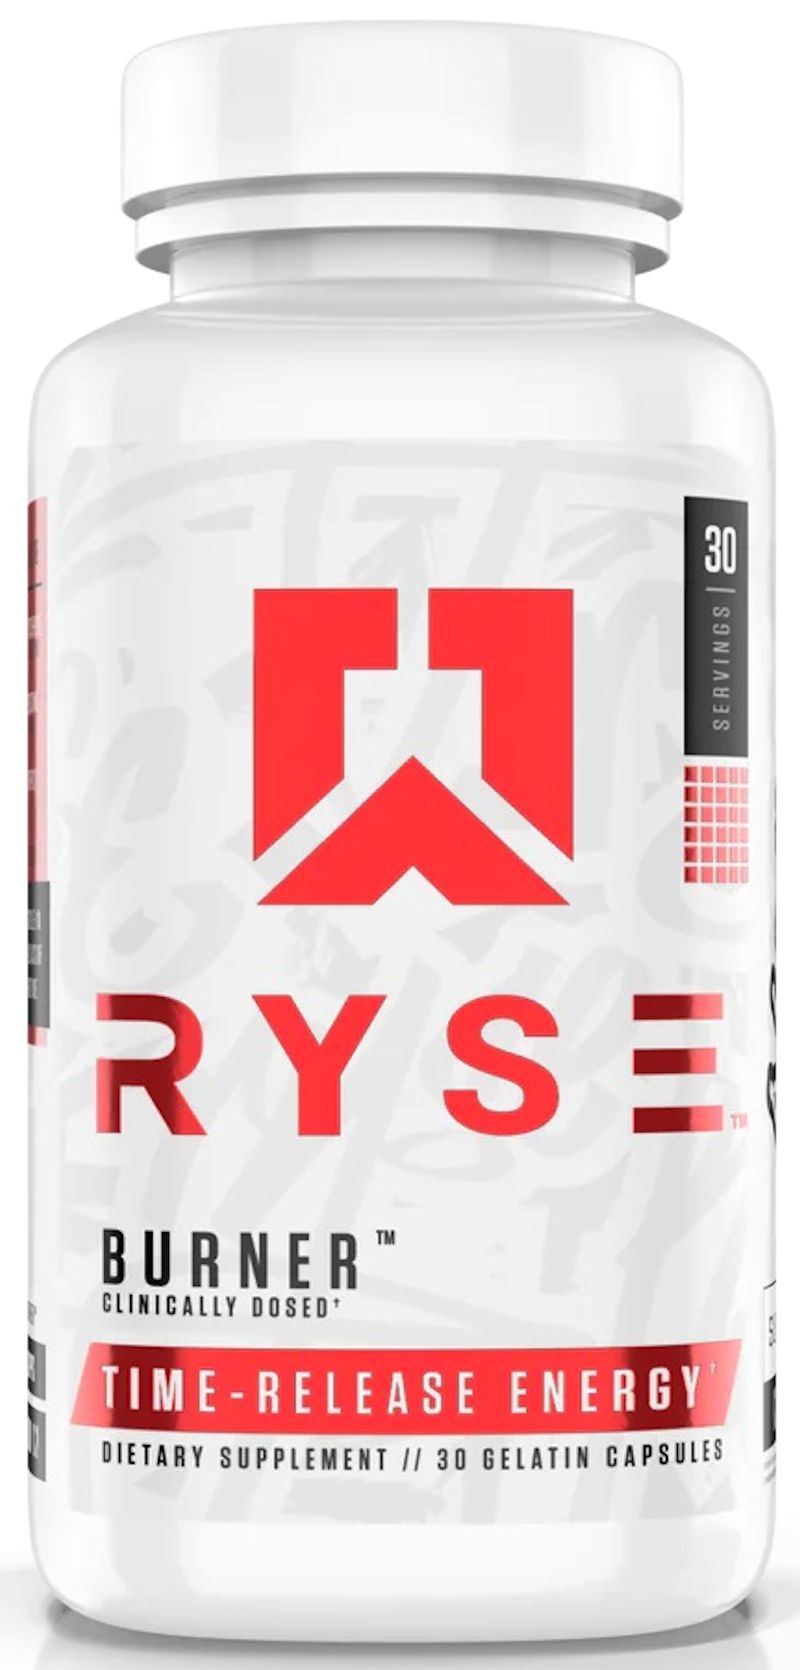 Ryse Supplements Burner Weight Loss fat